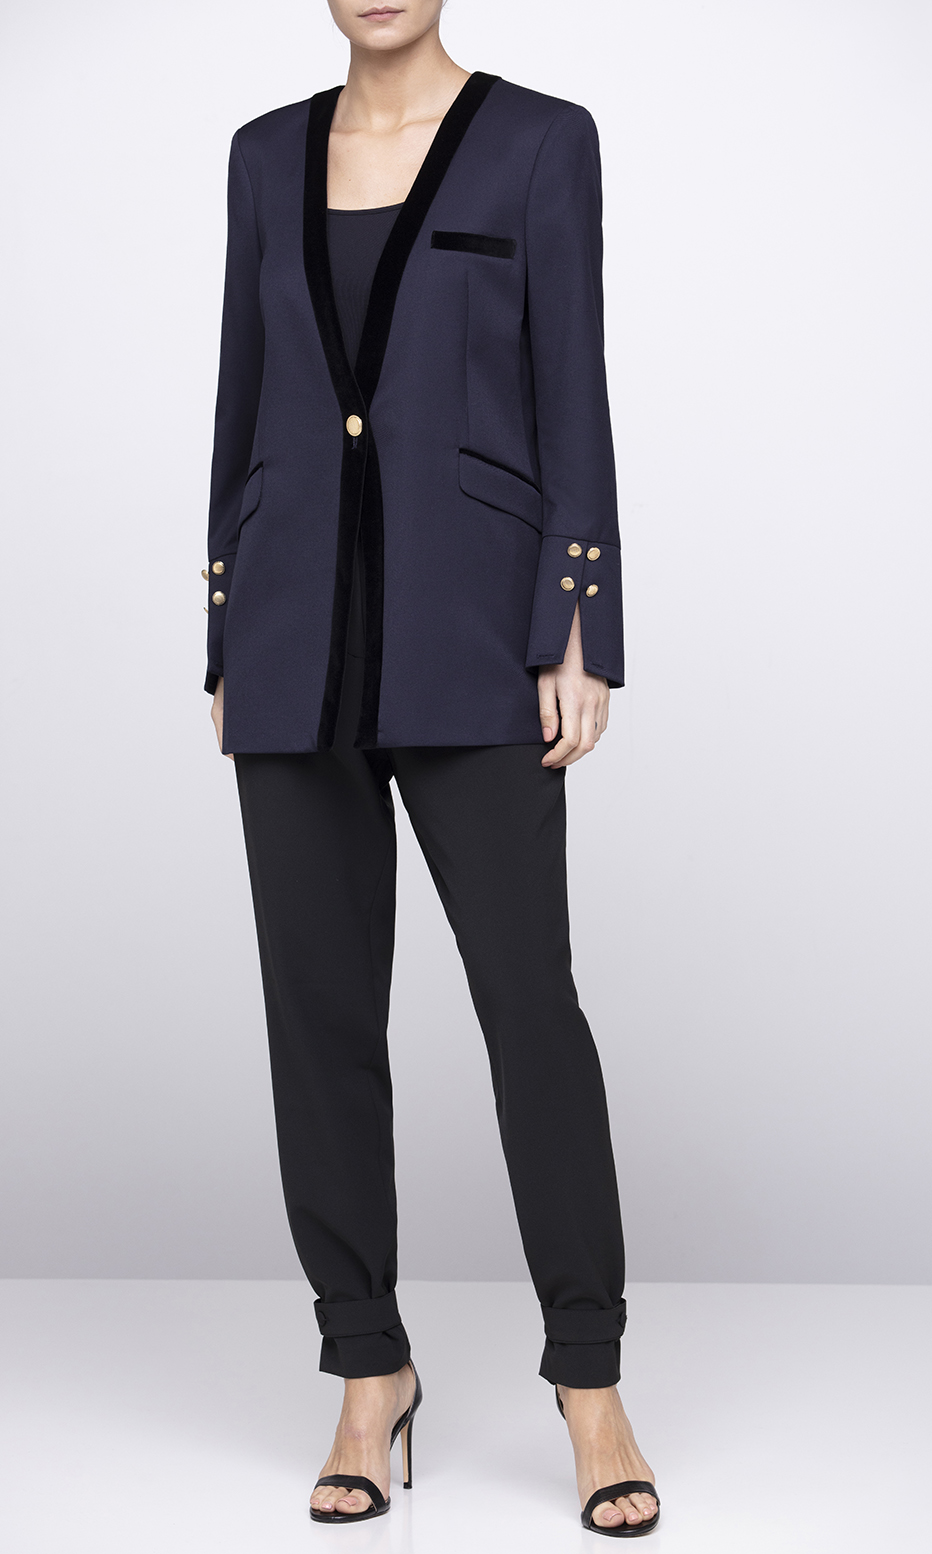 lapelless blazer with contrast piping